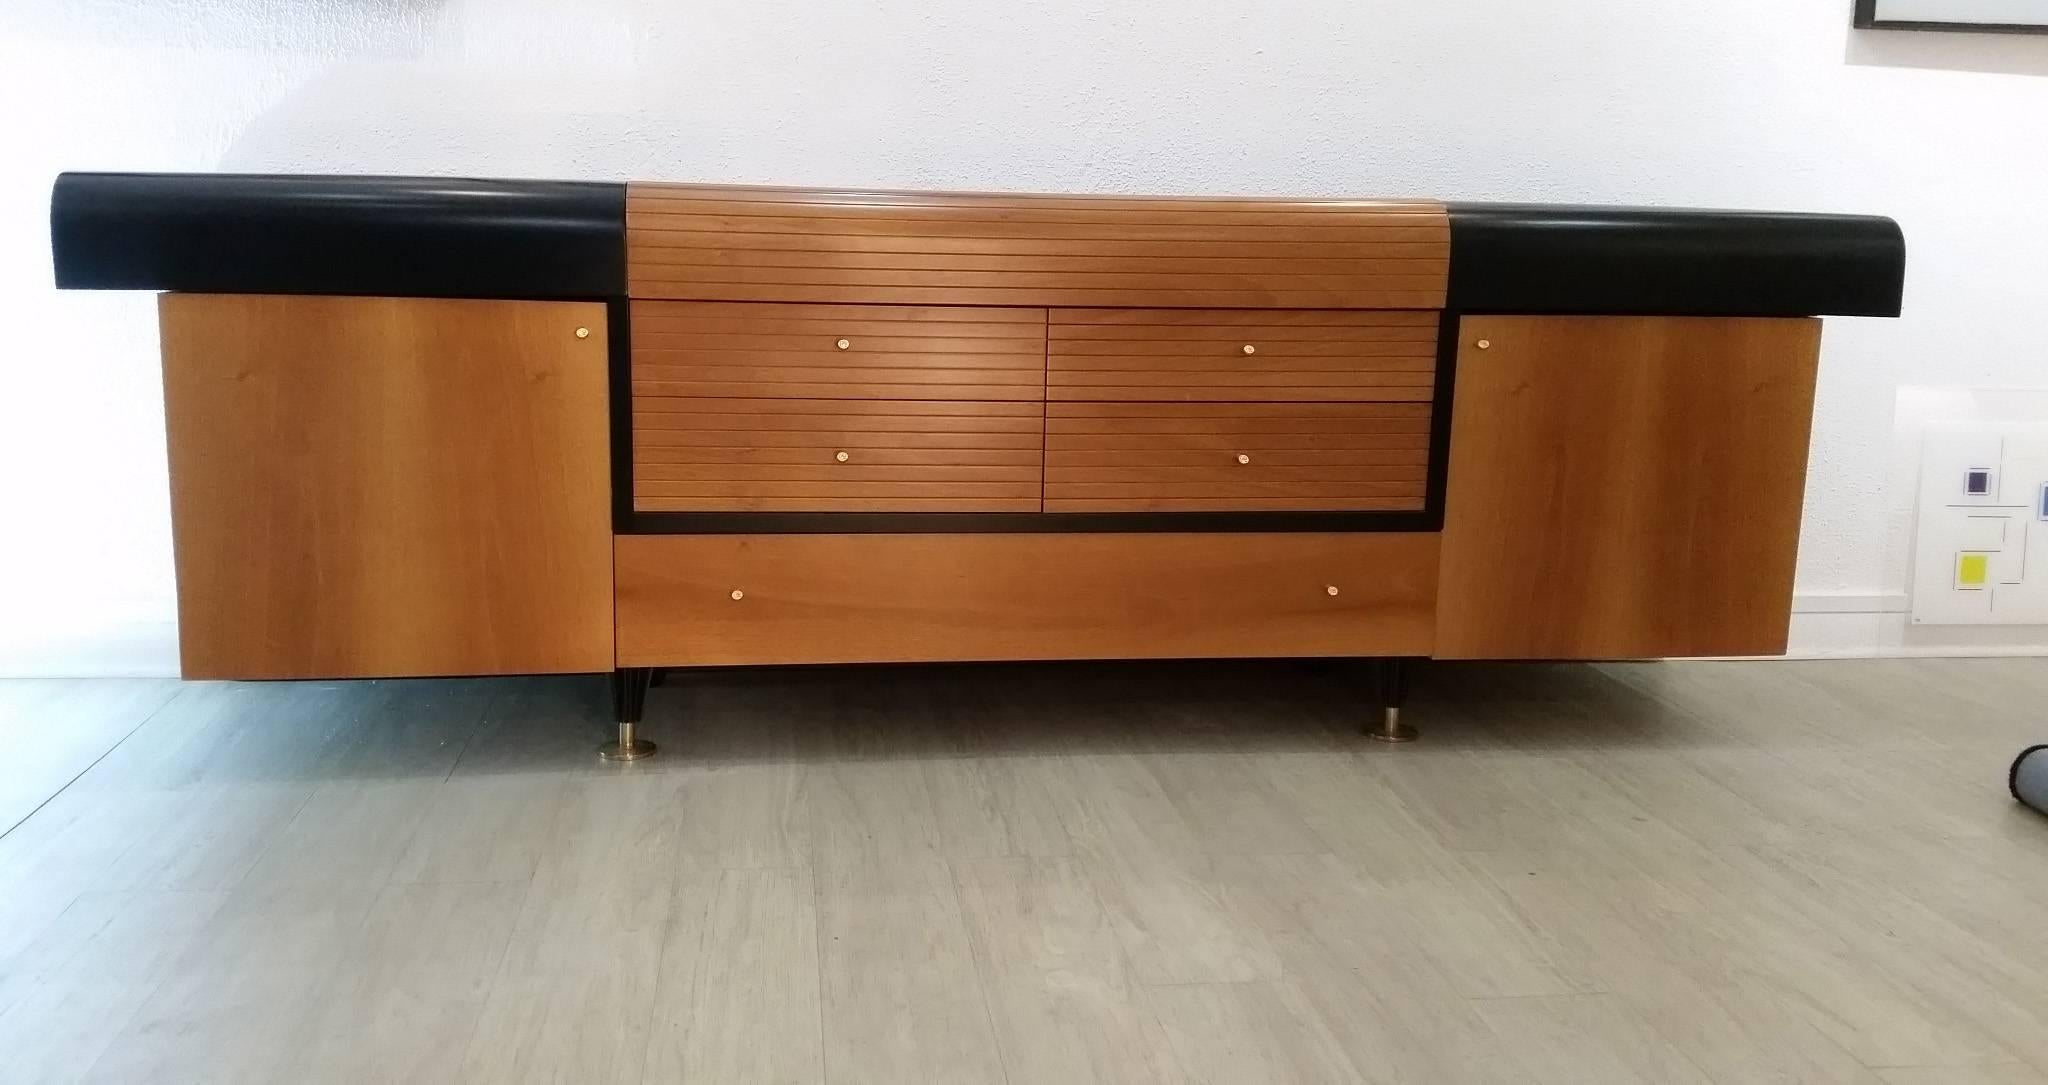 Rare graphic Buffet of the French designer Pierre Cardin
Vintage,
circa 1980
Black lacquered wood and teak
Handles signed / engraved by the designer with his logo
This sideboard has five drawers in the middle, two top flaps on each side forming